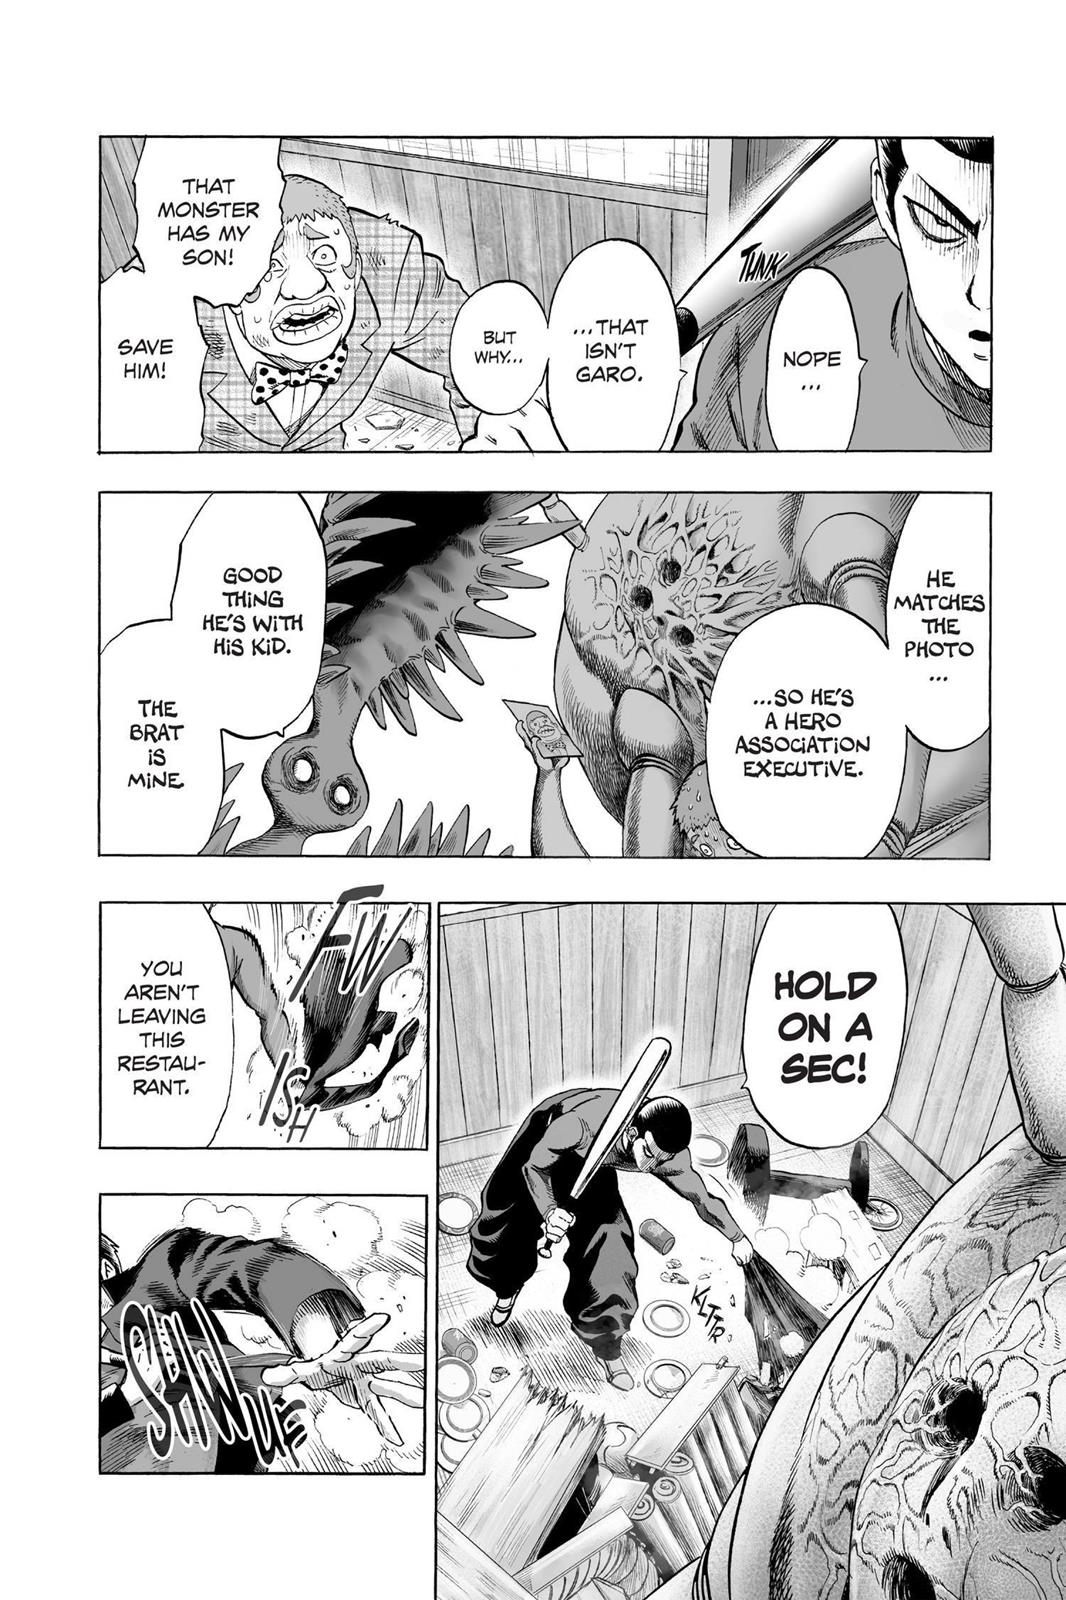 One-Punch Man, Punch 52 image 12